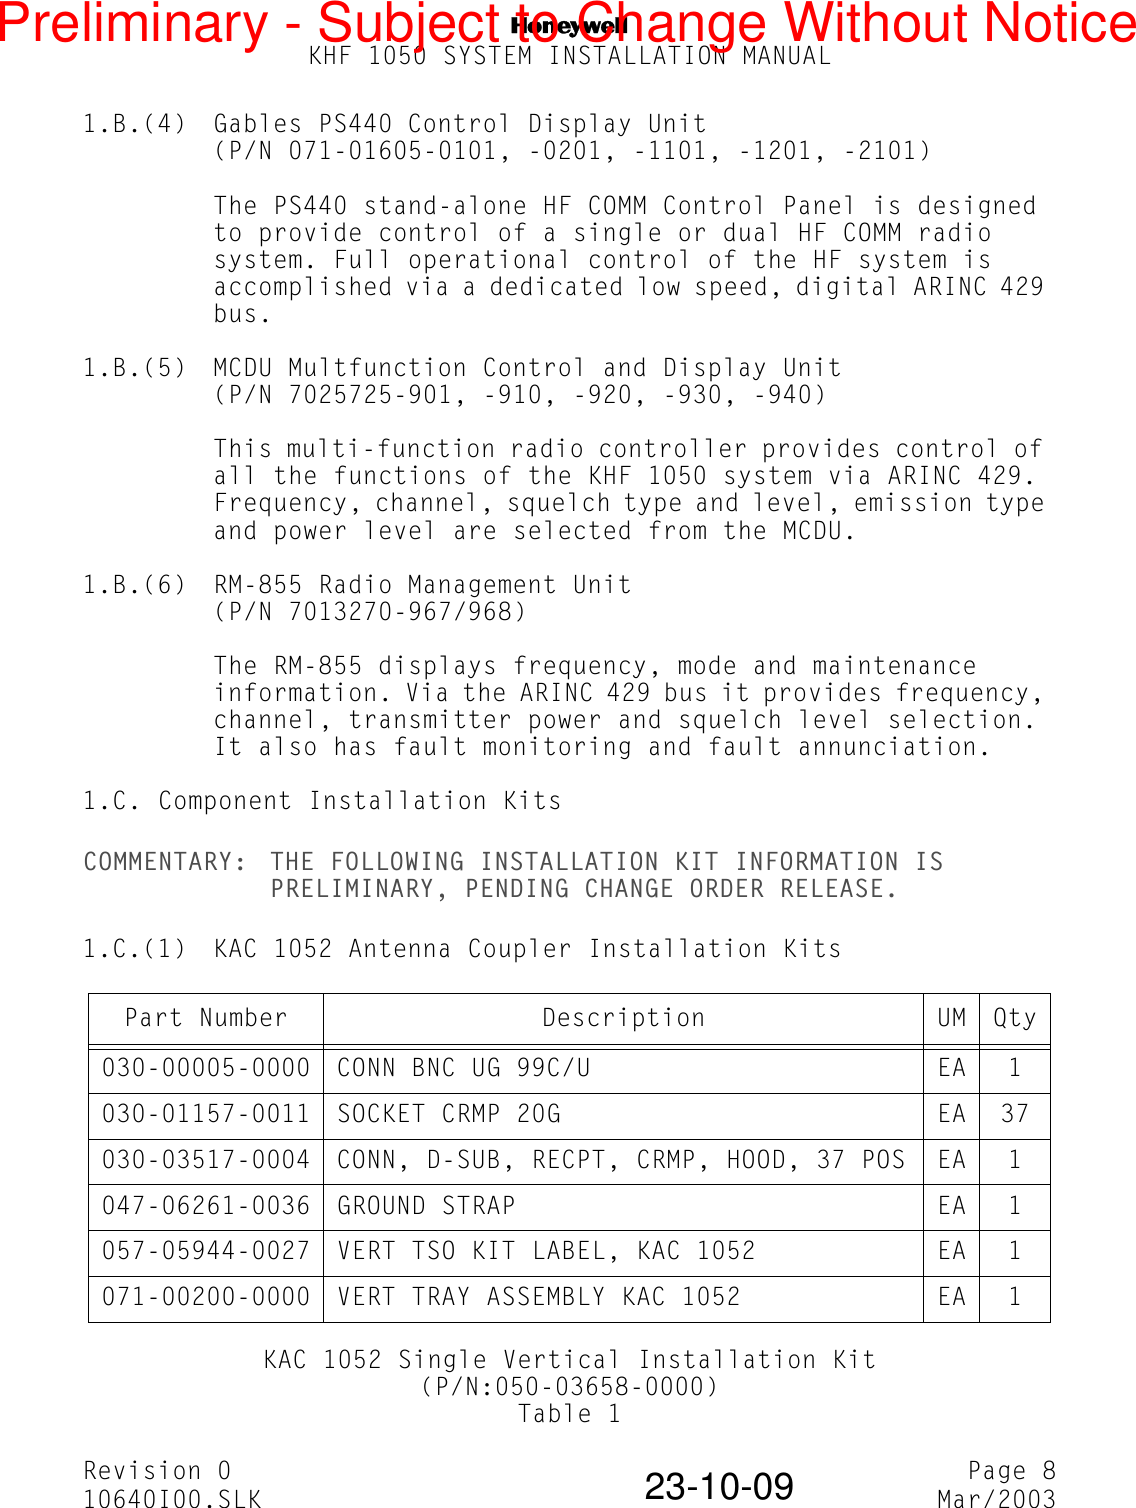 NKHF 1050 SYSTEM INSTALLATION MANUALRevision 0 Page 810640I00.SLK Mar/200323-10-091.B.(4) Gables PS440 Control Display Unit(P/N 071-01605-0101, -0201, -1101, -1201, -2101)The PS440 stand-alone HF COMM Control Panel is designed to provide control of a single or dual HF COMM radio system. Full operational control of the HF system is accomplished via a dedicated low speed, digital ARINC 429 bus.1.B.(5) MCDU Multfunction Control and Display Unit(P/N 7025725-901, -910, -920, -930, -940)This multi-function radio controller provides control of all the functions of the KHF 1050 system via ARINC 429. Frequency, channel, squelch type and level, emission type and power level are selected from the MCDU.1.B.(6) RM-855 Radio Management Unit(P/N 7013270-967/968)The RM-855 displays frequency, mode and maintenance information. Via the ARINC 429 bus it provides frequency, channel, transmitter power and squelch level selection. It also has fault monitoring and fault annunciation.1.C. Component Installation KitsCOMMENTARY: THE FOLLOWING INSTALLATION KIT INFORMATION IS PRELIMINARY, PENDING CHANGE ORDER RELEASE.1.C.(1) KAC 1052 Antenna Coupler Installation KitsKAC 1052 Single Vertical Installation Kit(P/N:050-03658-0000)Table 1Part Number Description UM Qty030-00005-0000 CONN BNC UG 99C/U EA 1030-01157-0011 SOCKET CRMP 20G EA 37030-03517-0004 CONN, D-SUB, RECPT, CRMP, HOOD, 37 POS EA 1047-06261-0036 GROUND STRAP EA 1057-05944-0027 VERT TSO KIT LABEL, KAC 1052 EA 1071-00200-0000  VERT TRAY ASSEMBLY KAC 1052 EA 1Preliminary - Subject to Change Without Notice